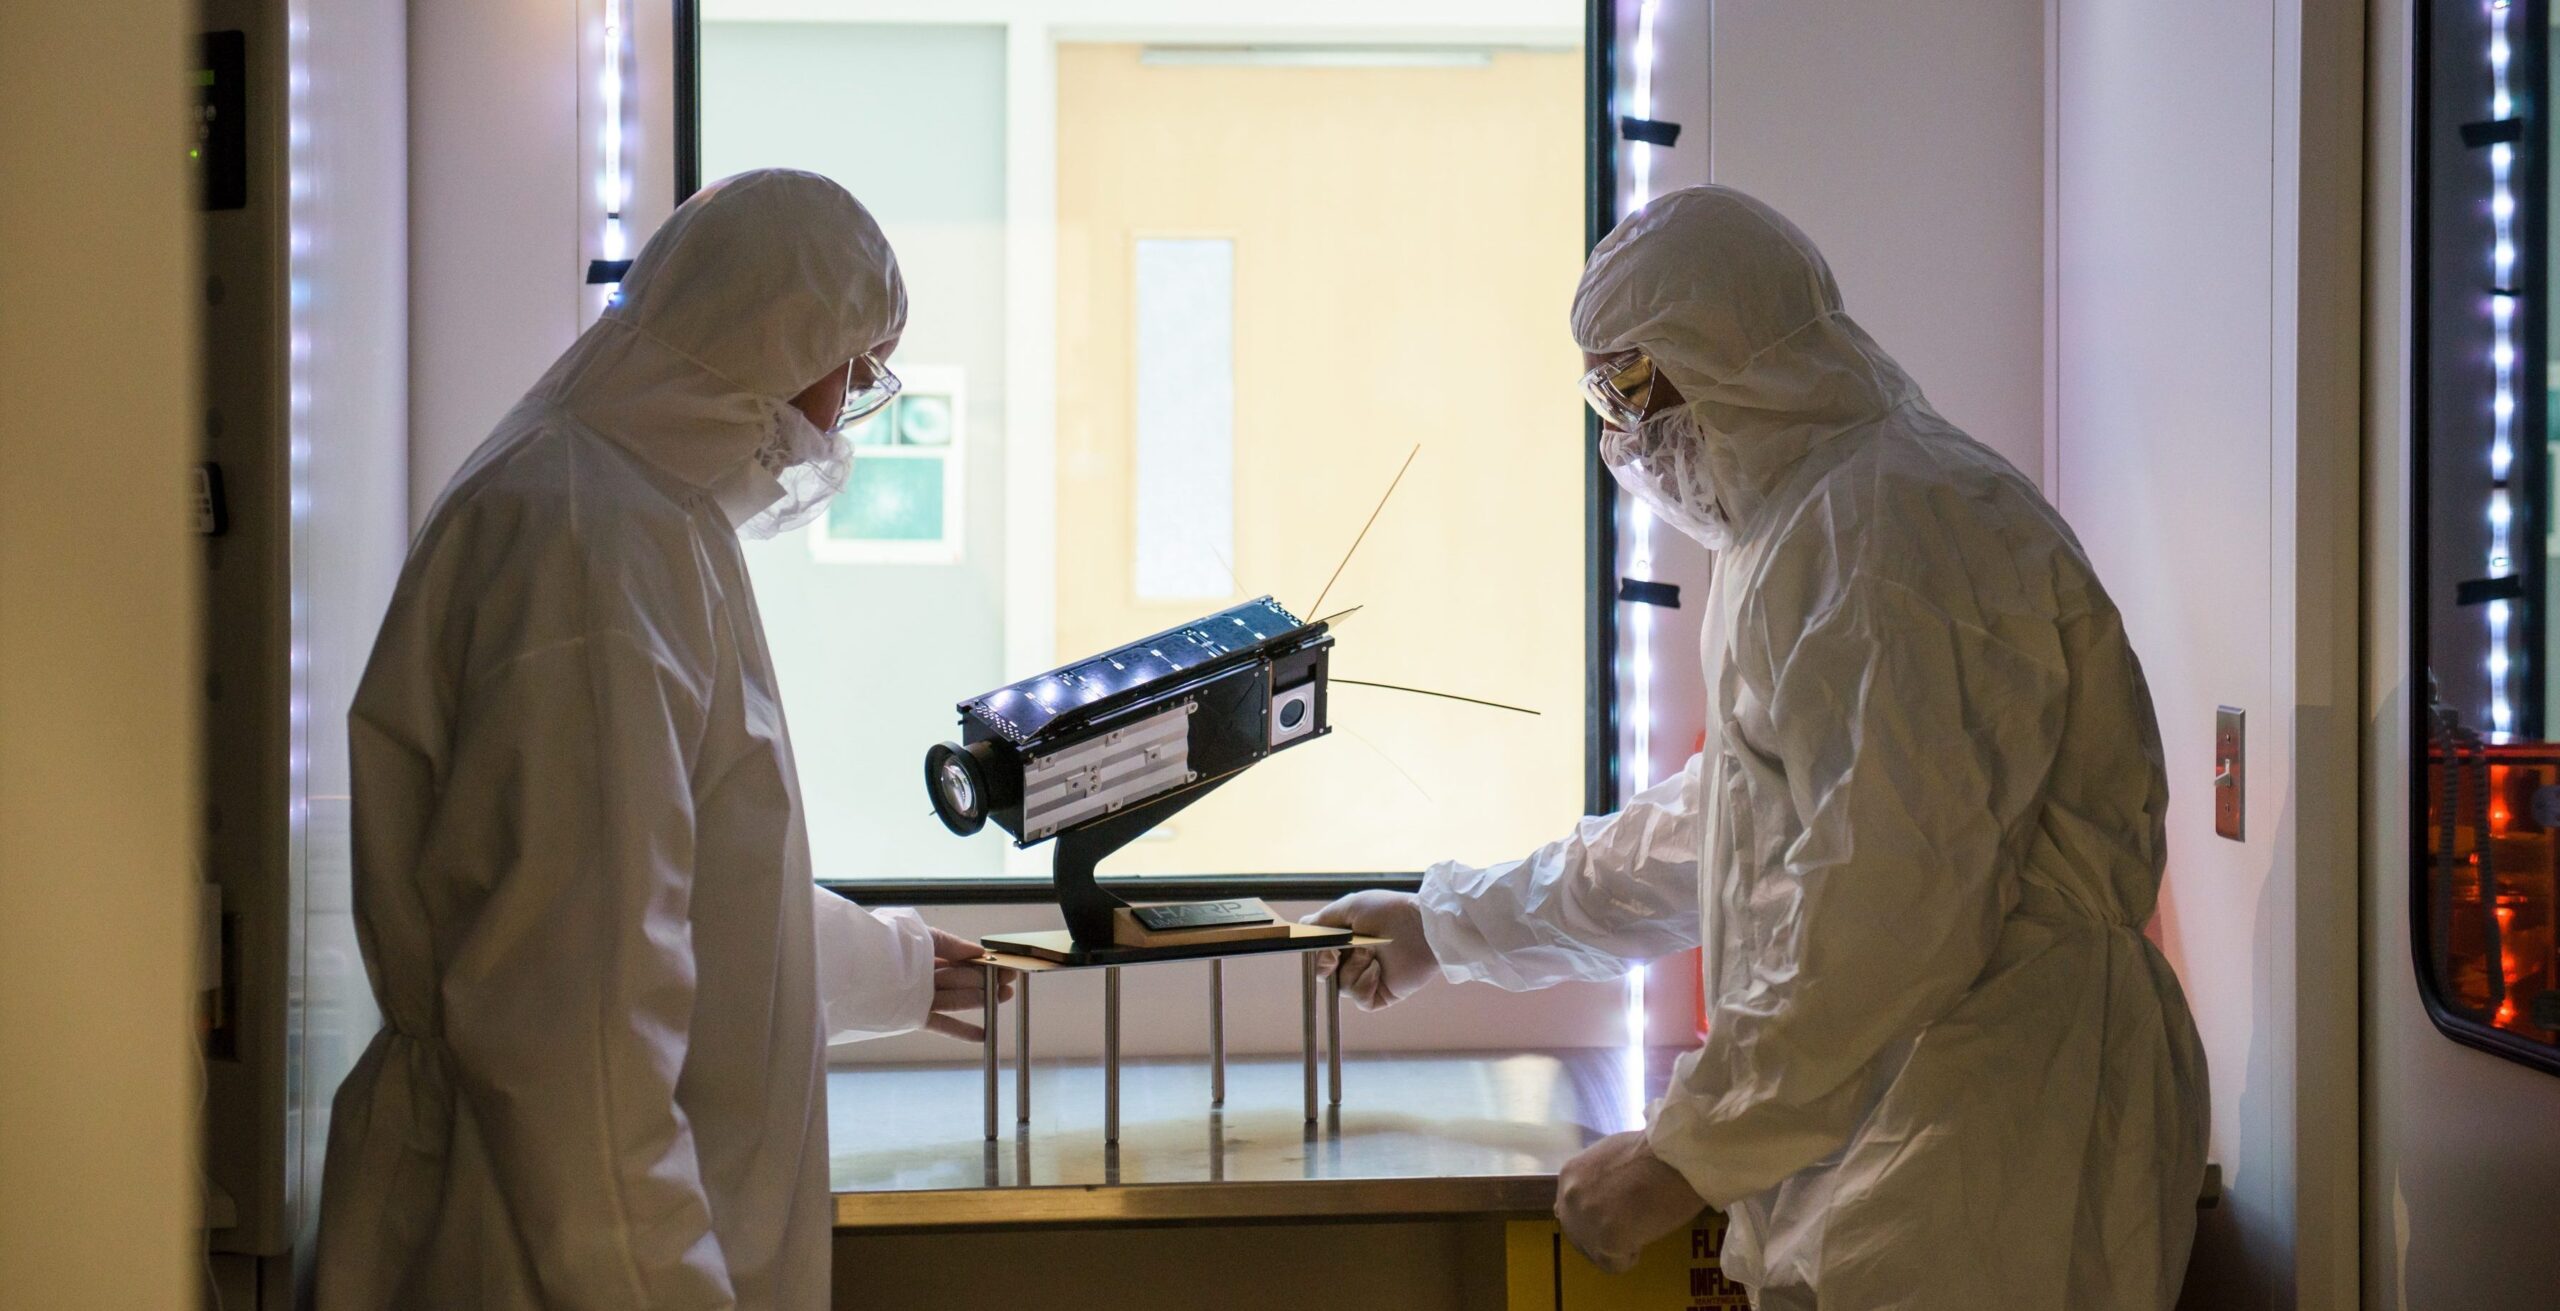 Two scientists in protective suits stand next to a piece of equipment with a large lens